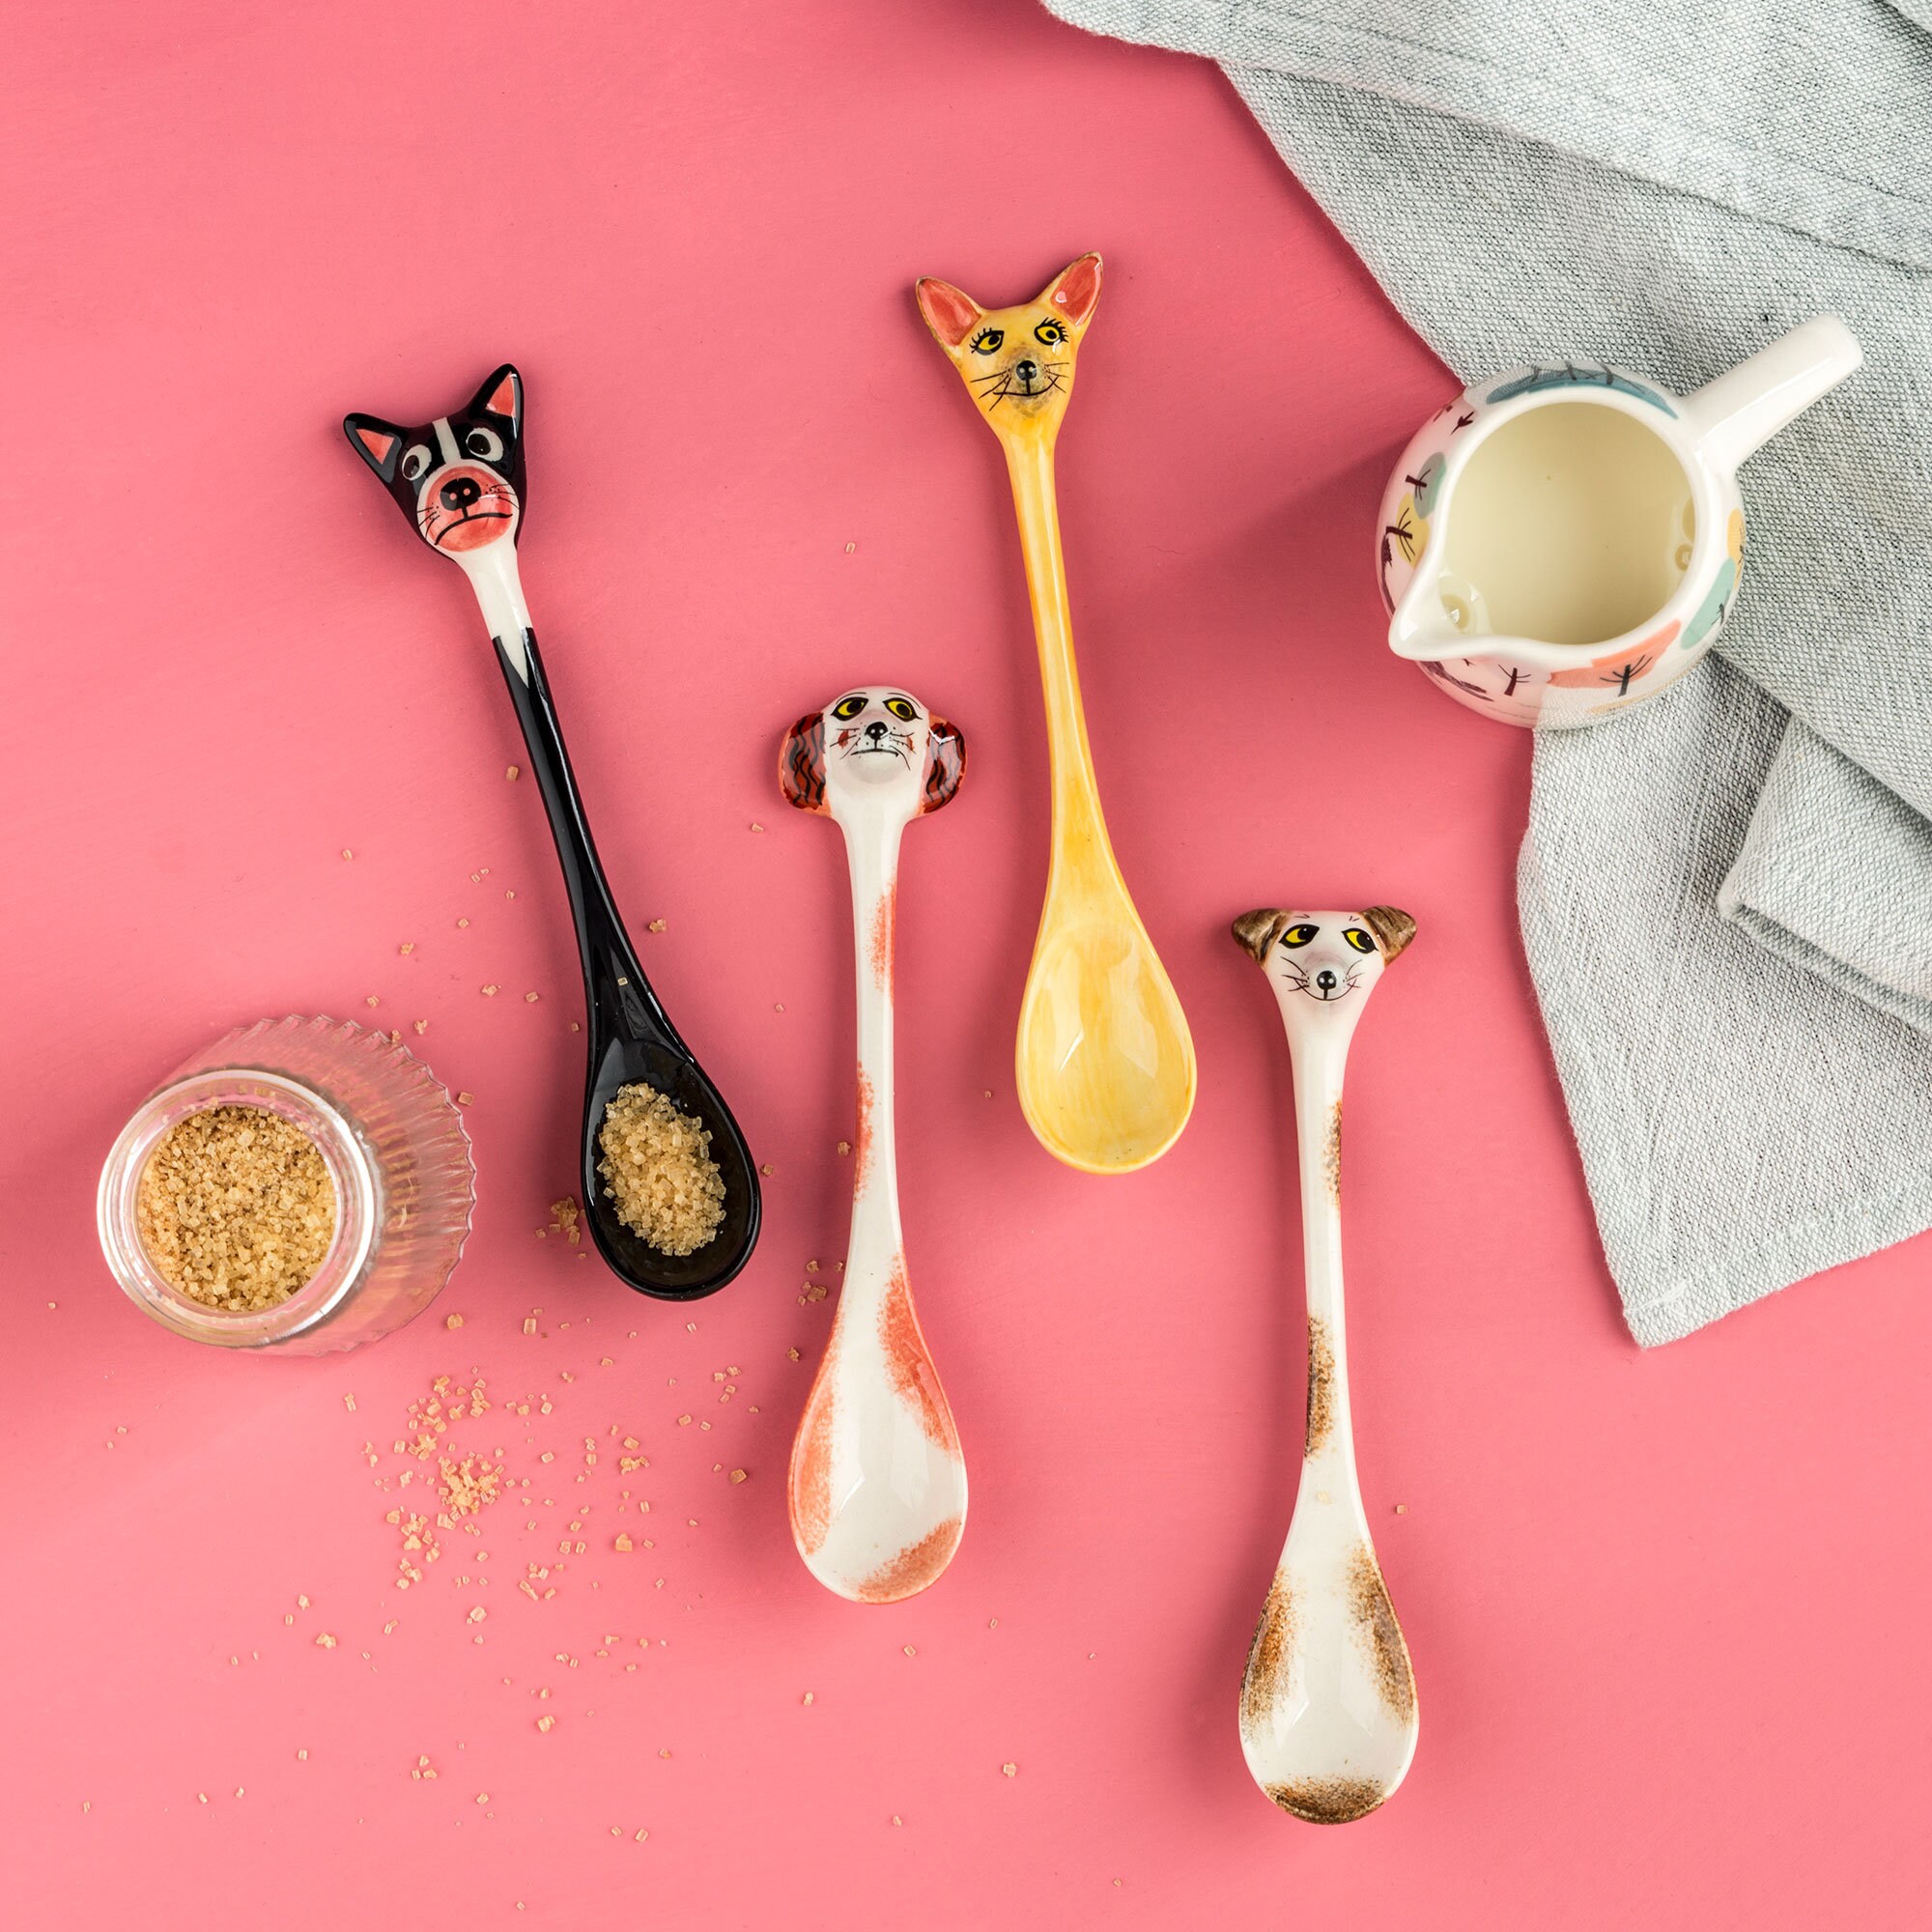 🐱Quirky Cat and Dog Ceramic Spoons🐶